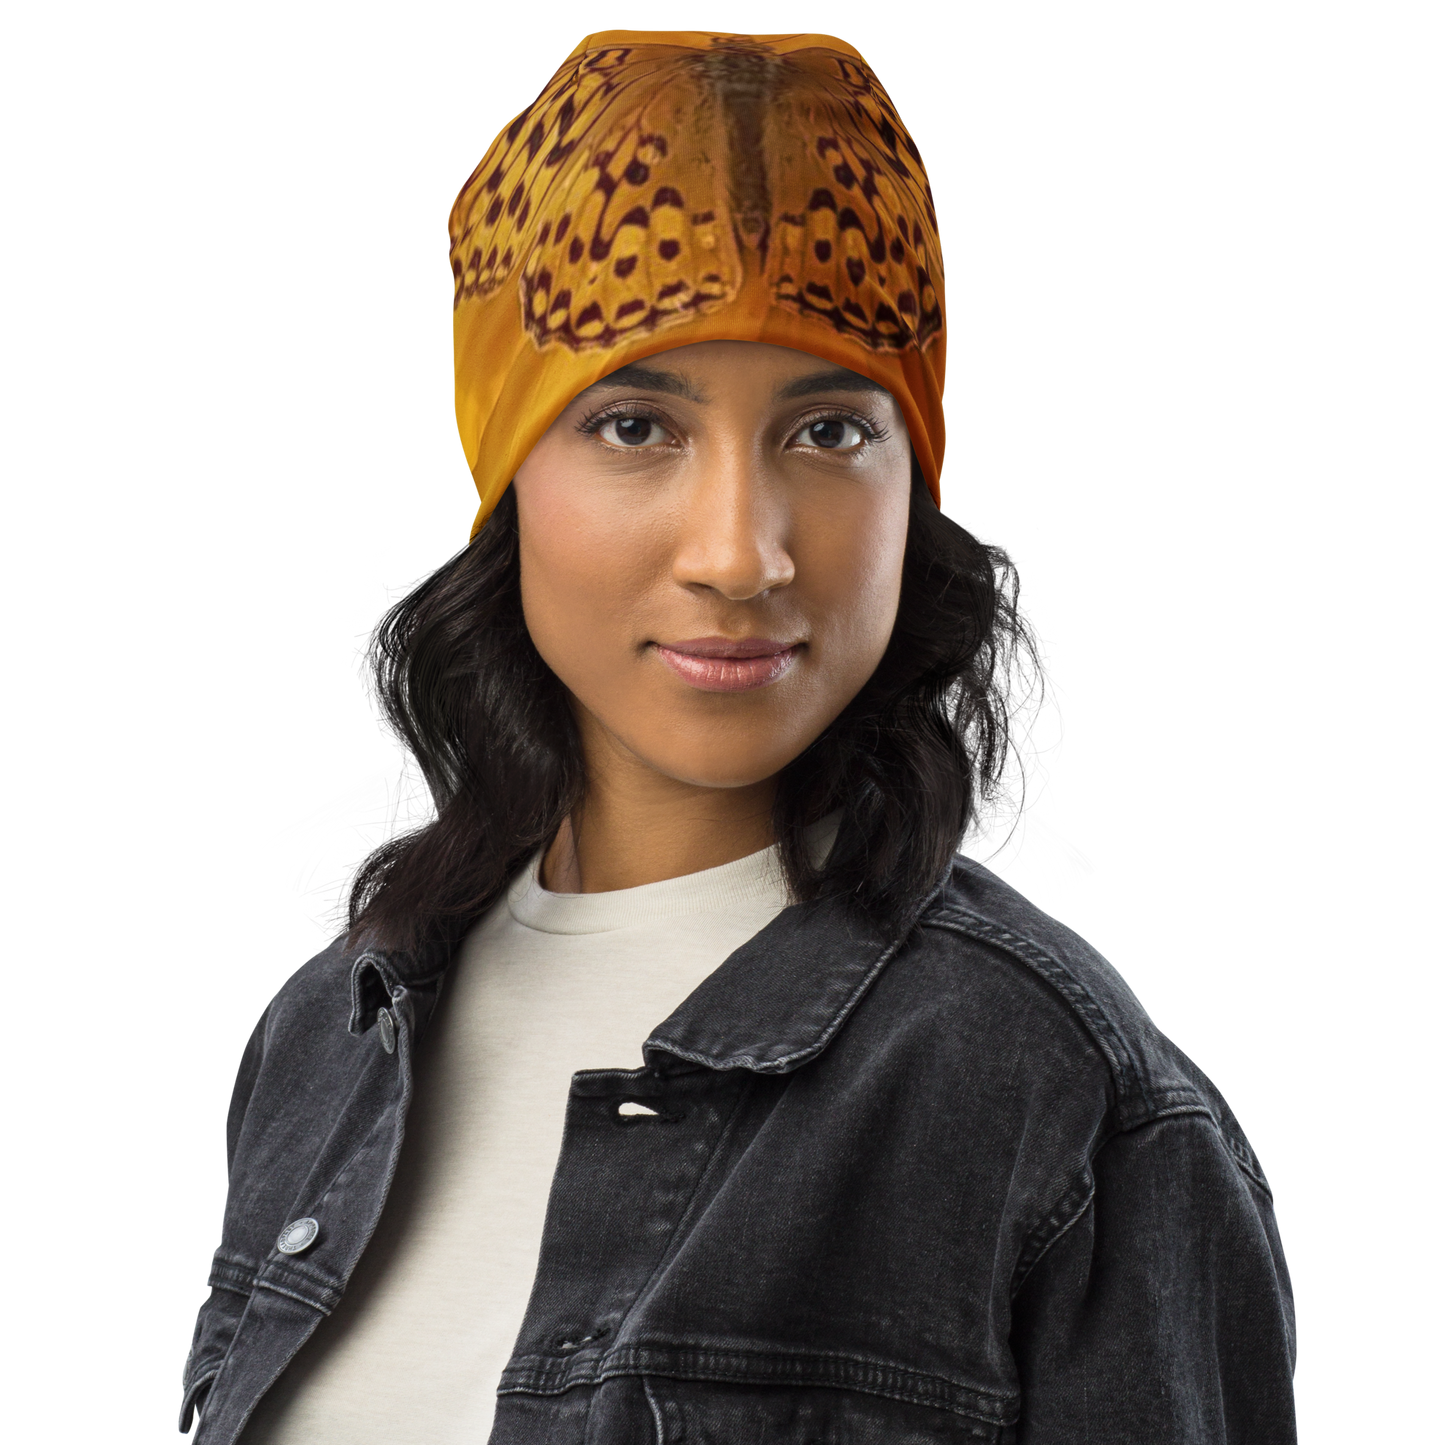 The FLOWER LOVE COLLECTION  -  "Butterfly Beauty" Design Beanie - Lightweight, Cute Chemo Hat